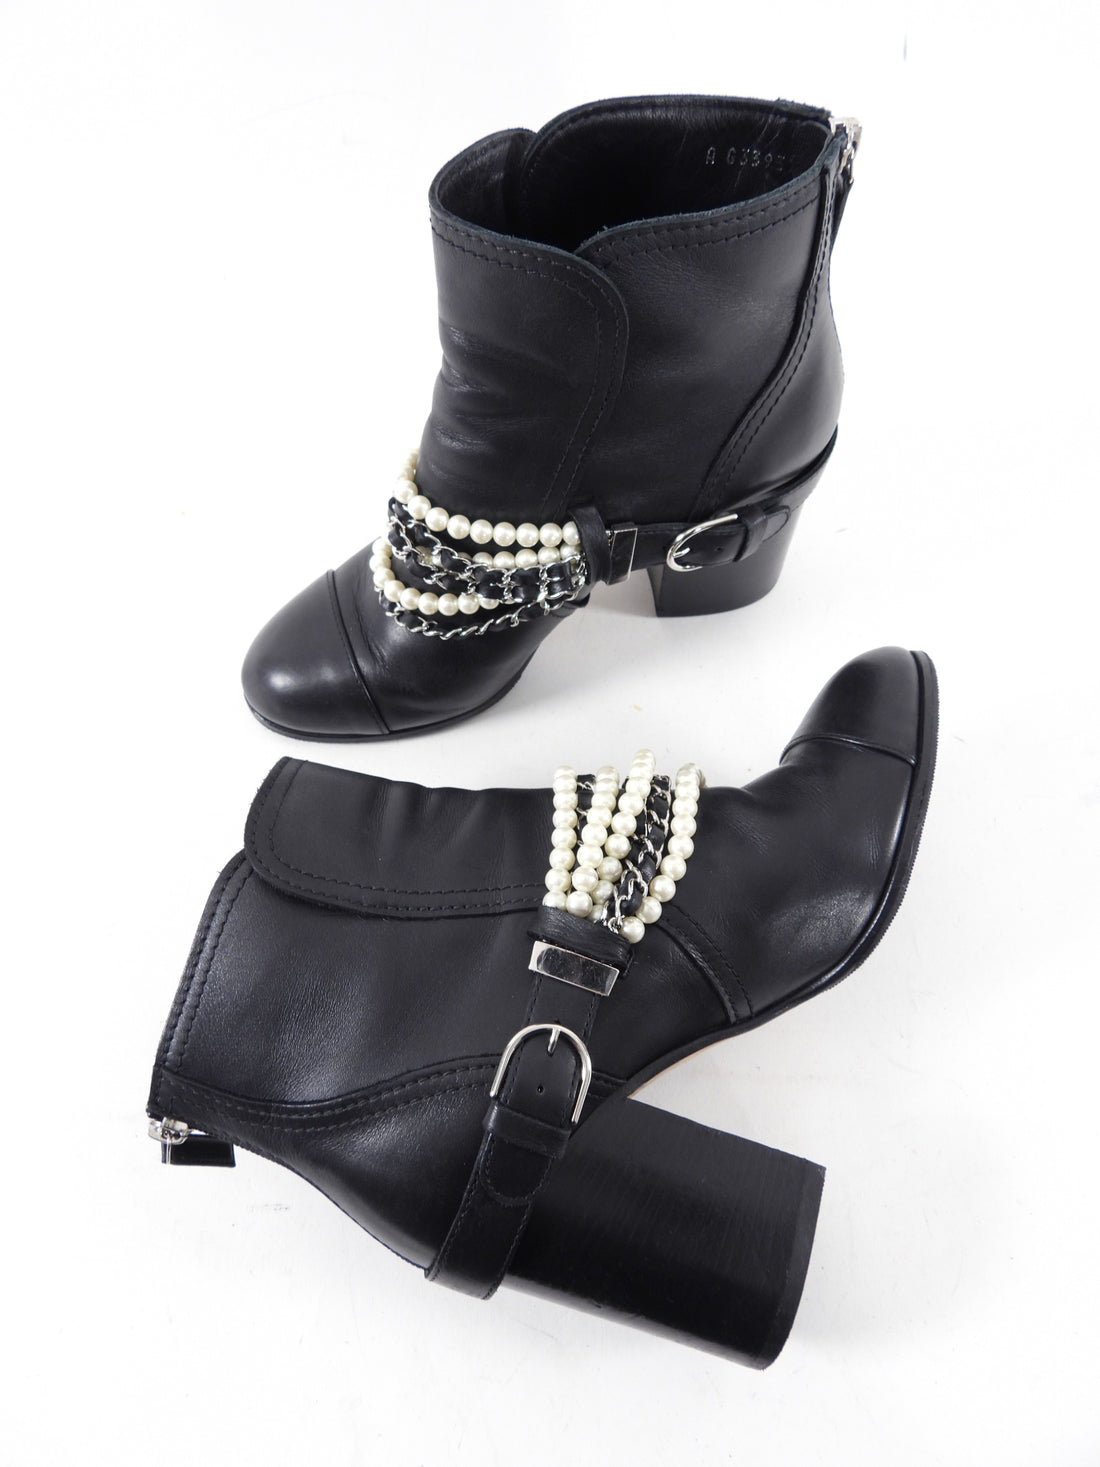 Chanel Black Leather Ankle Boots with Pearl Chain Detail  41  40  I MISS  YOU VINTAGE